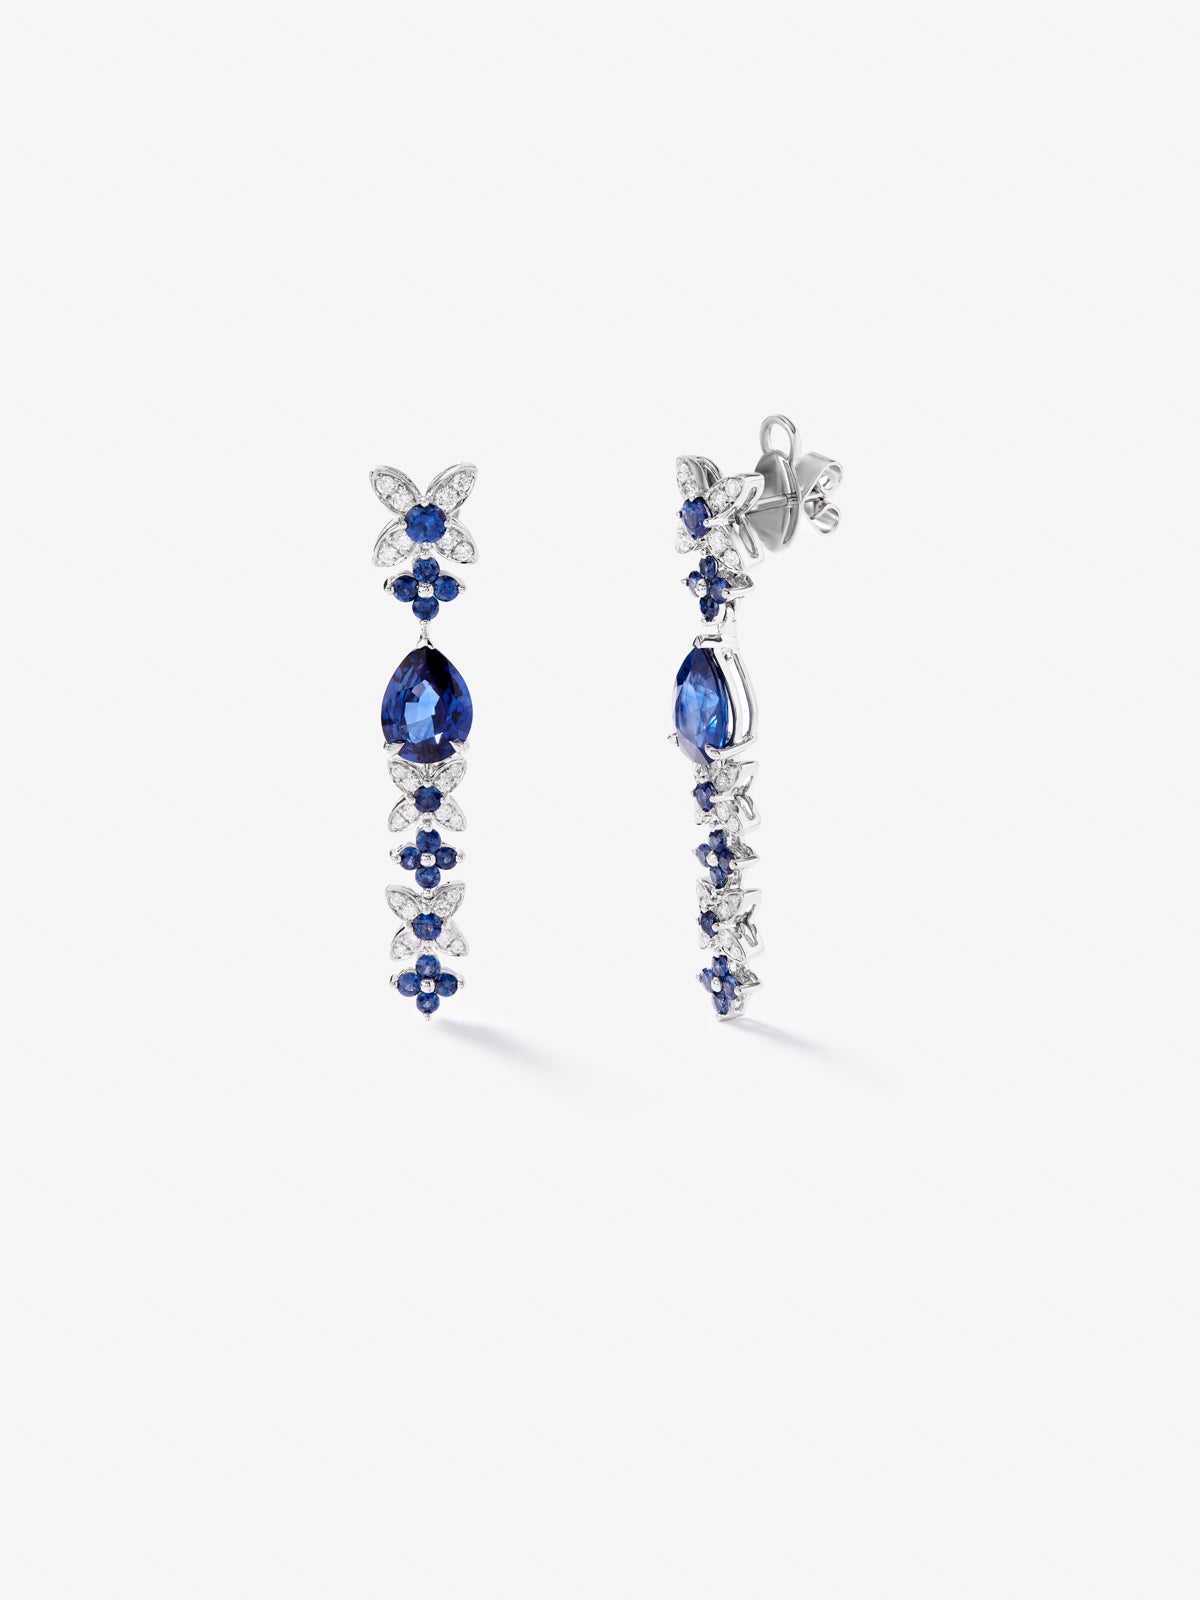 18k white gold earrings with royal blue sapps in pear size 4.05 cts, blue sapphires in bright size 1.27 cts and white diamonds in a bright size of 0.5 cts